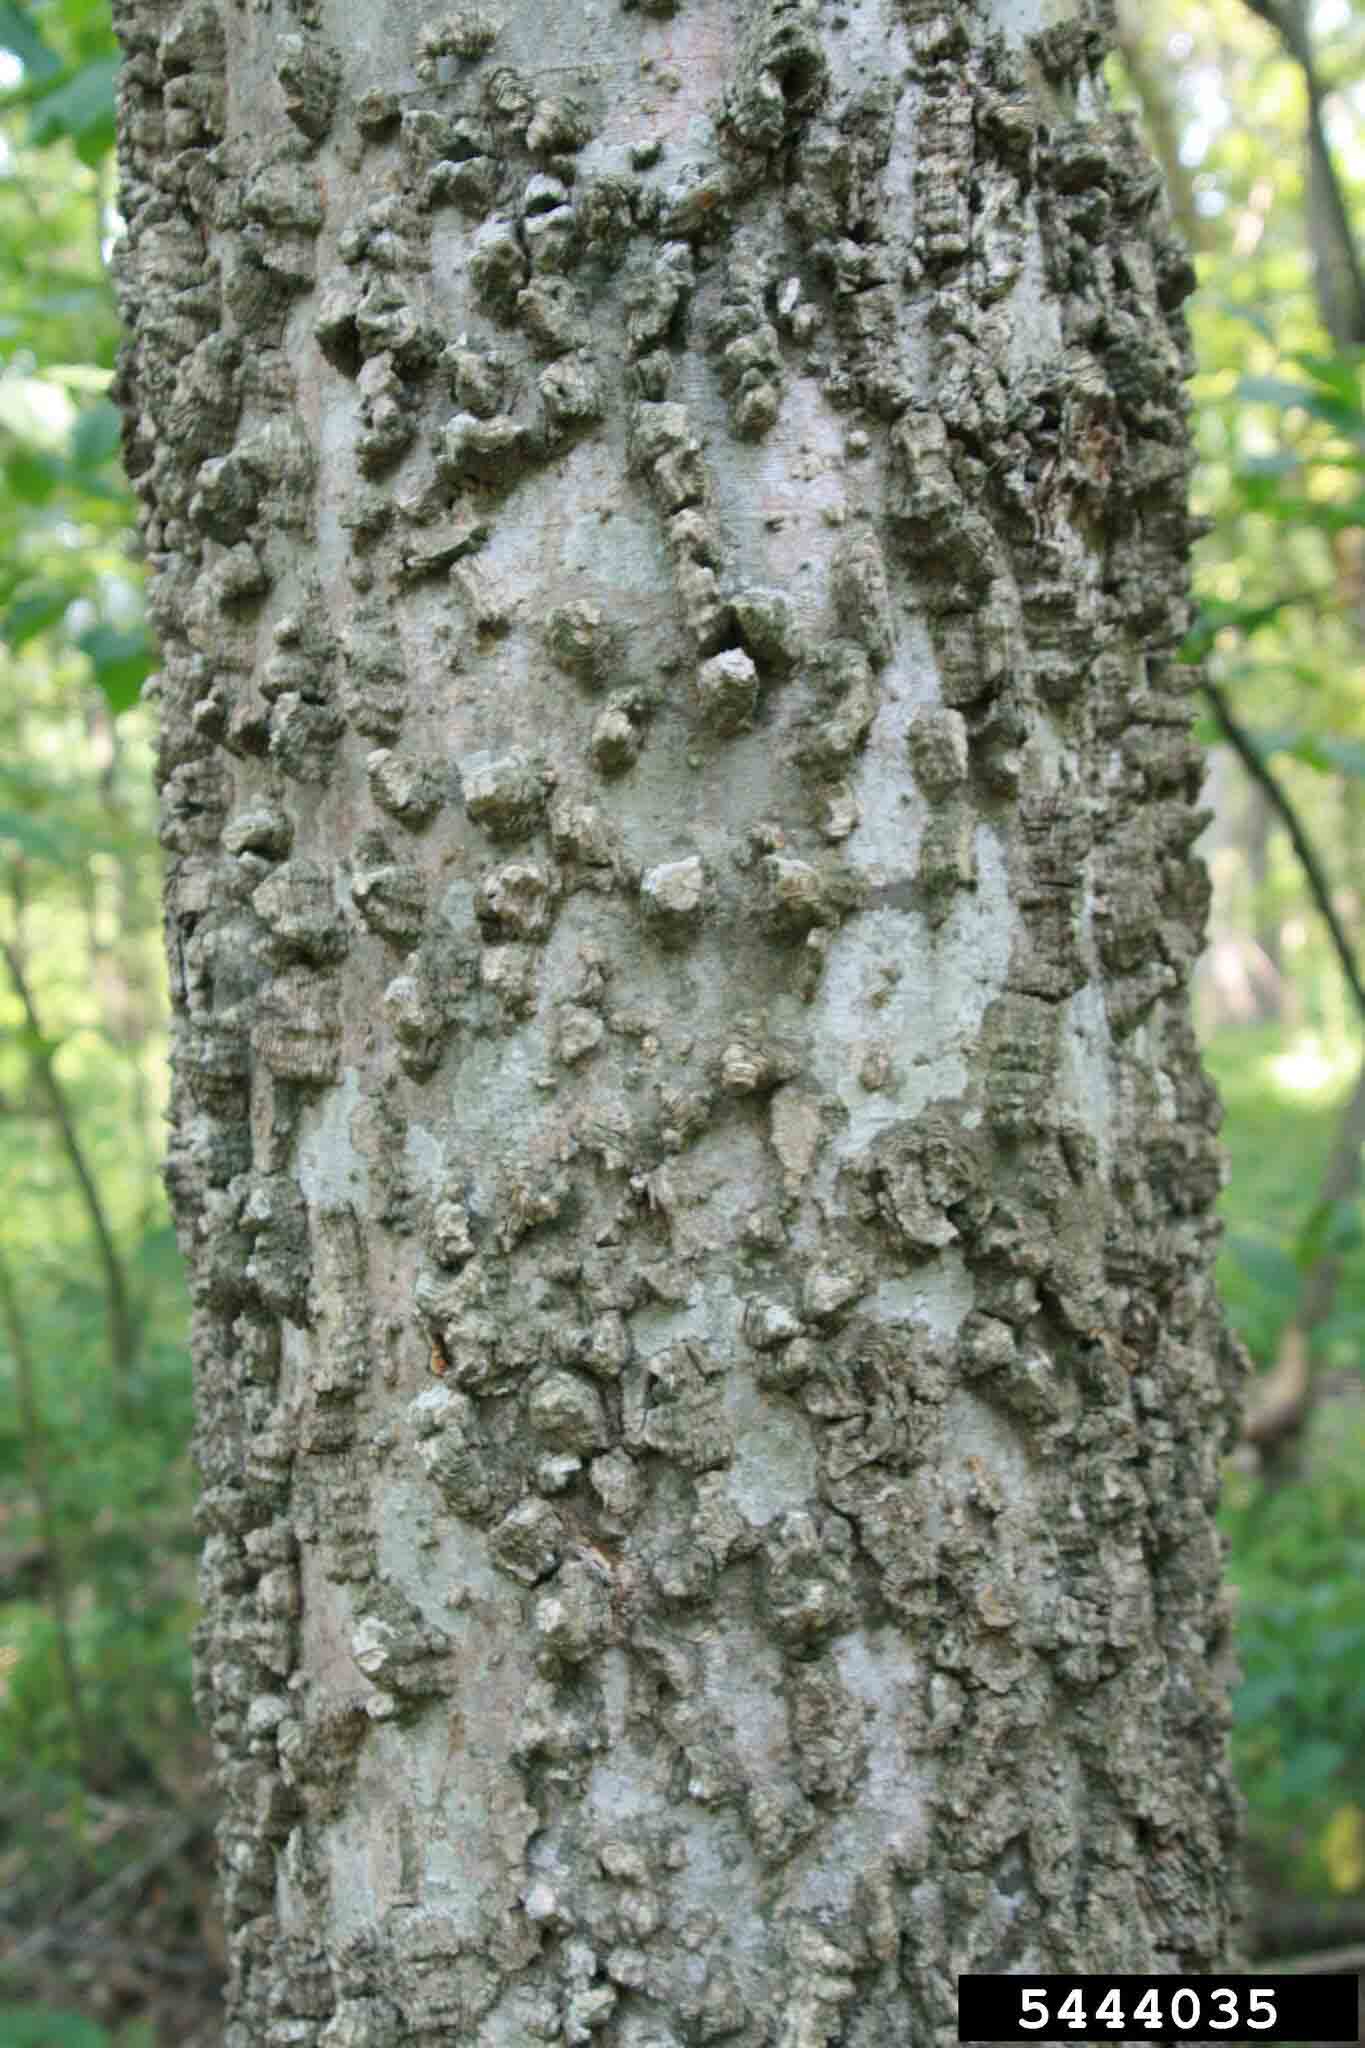 Sugarberry bark on trunk